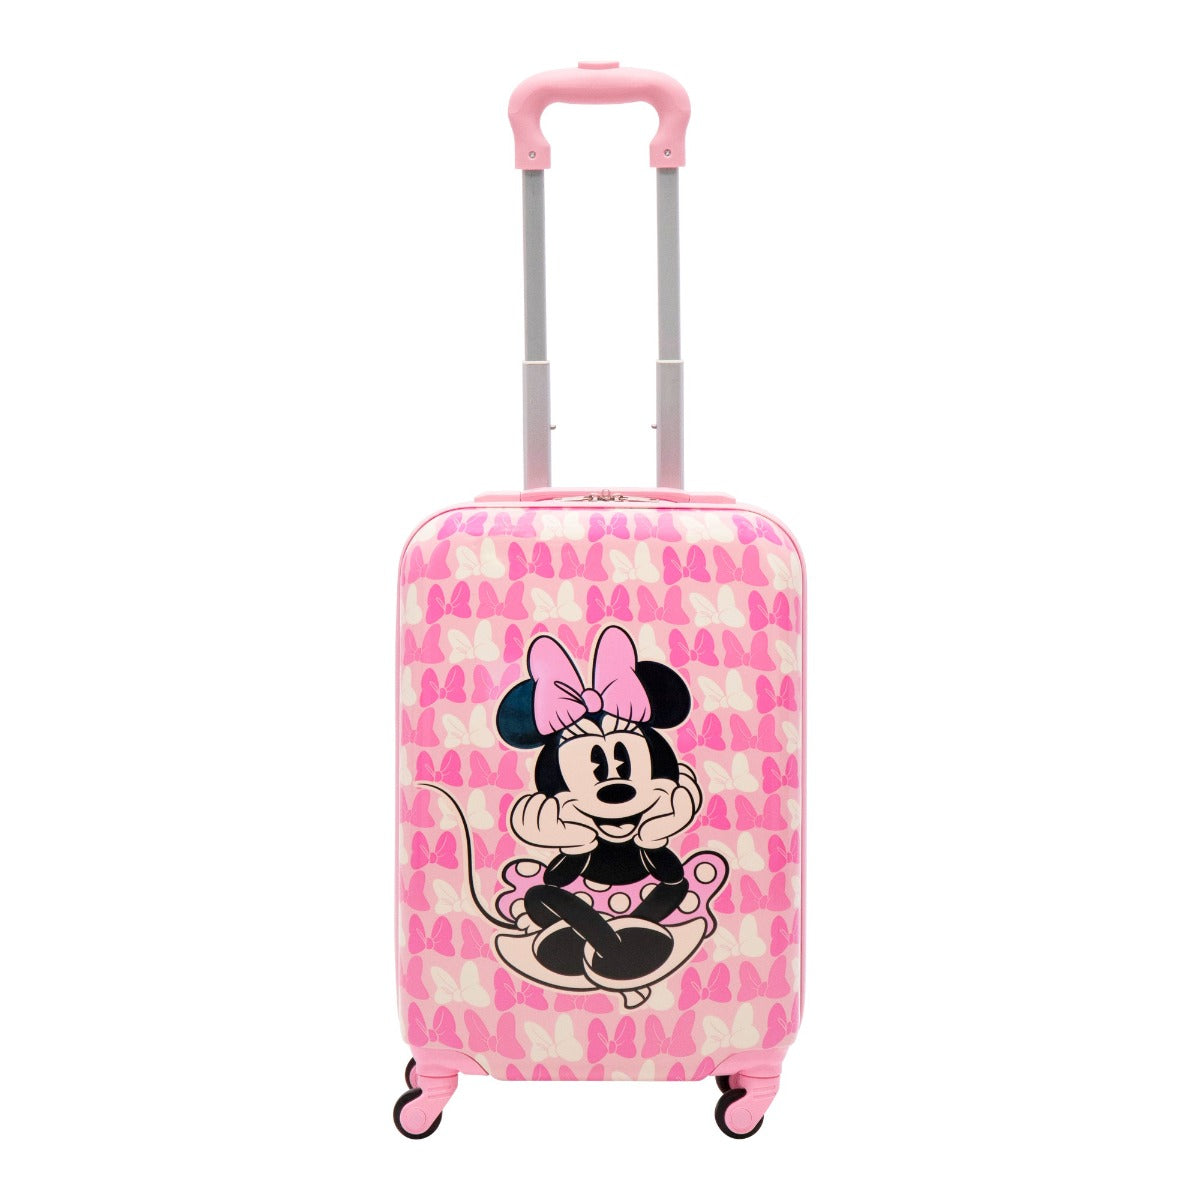 Ful Minnie Mouse Bows Print Hardside Spinner Suitcase - Pink Carry On 20.5 inch Disney Luggage for Kids 